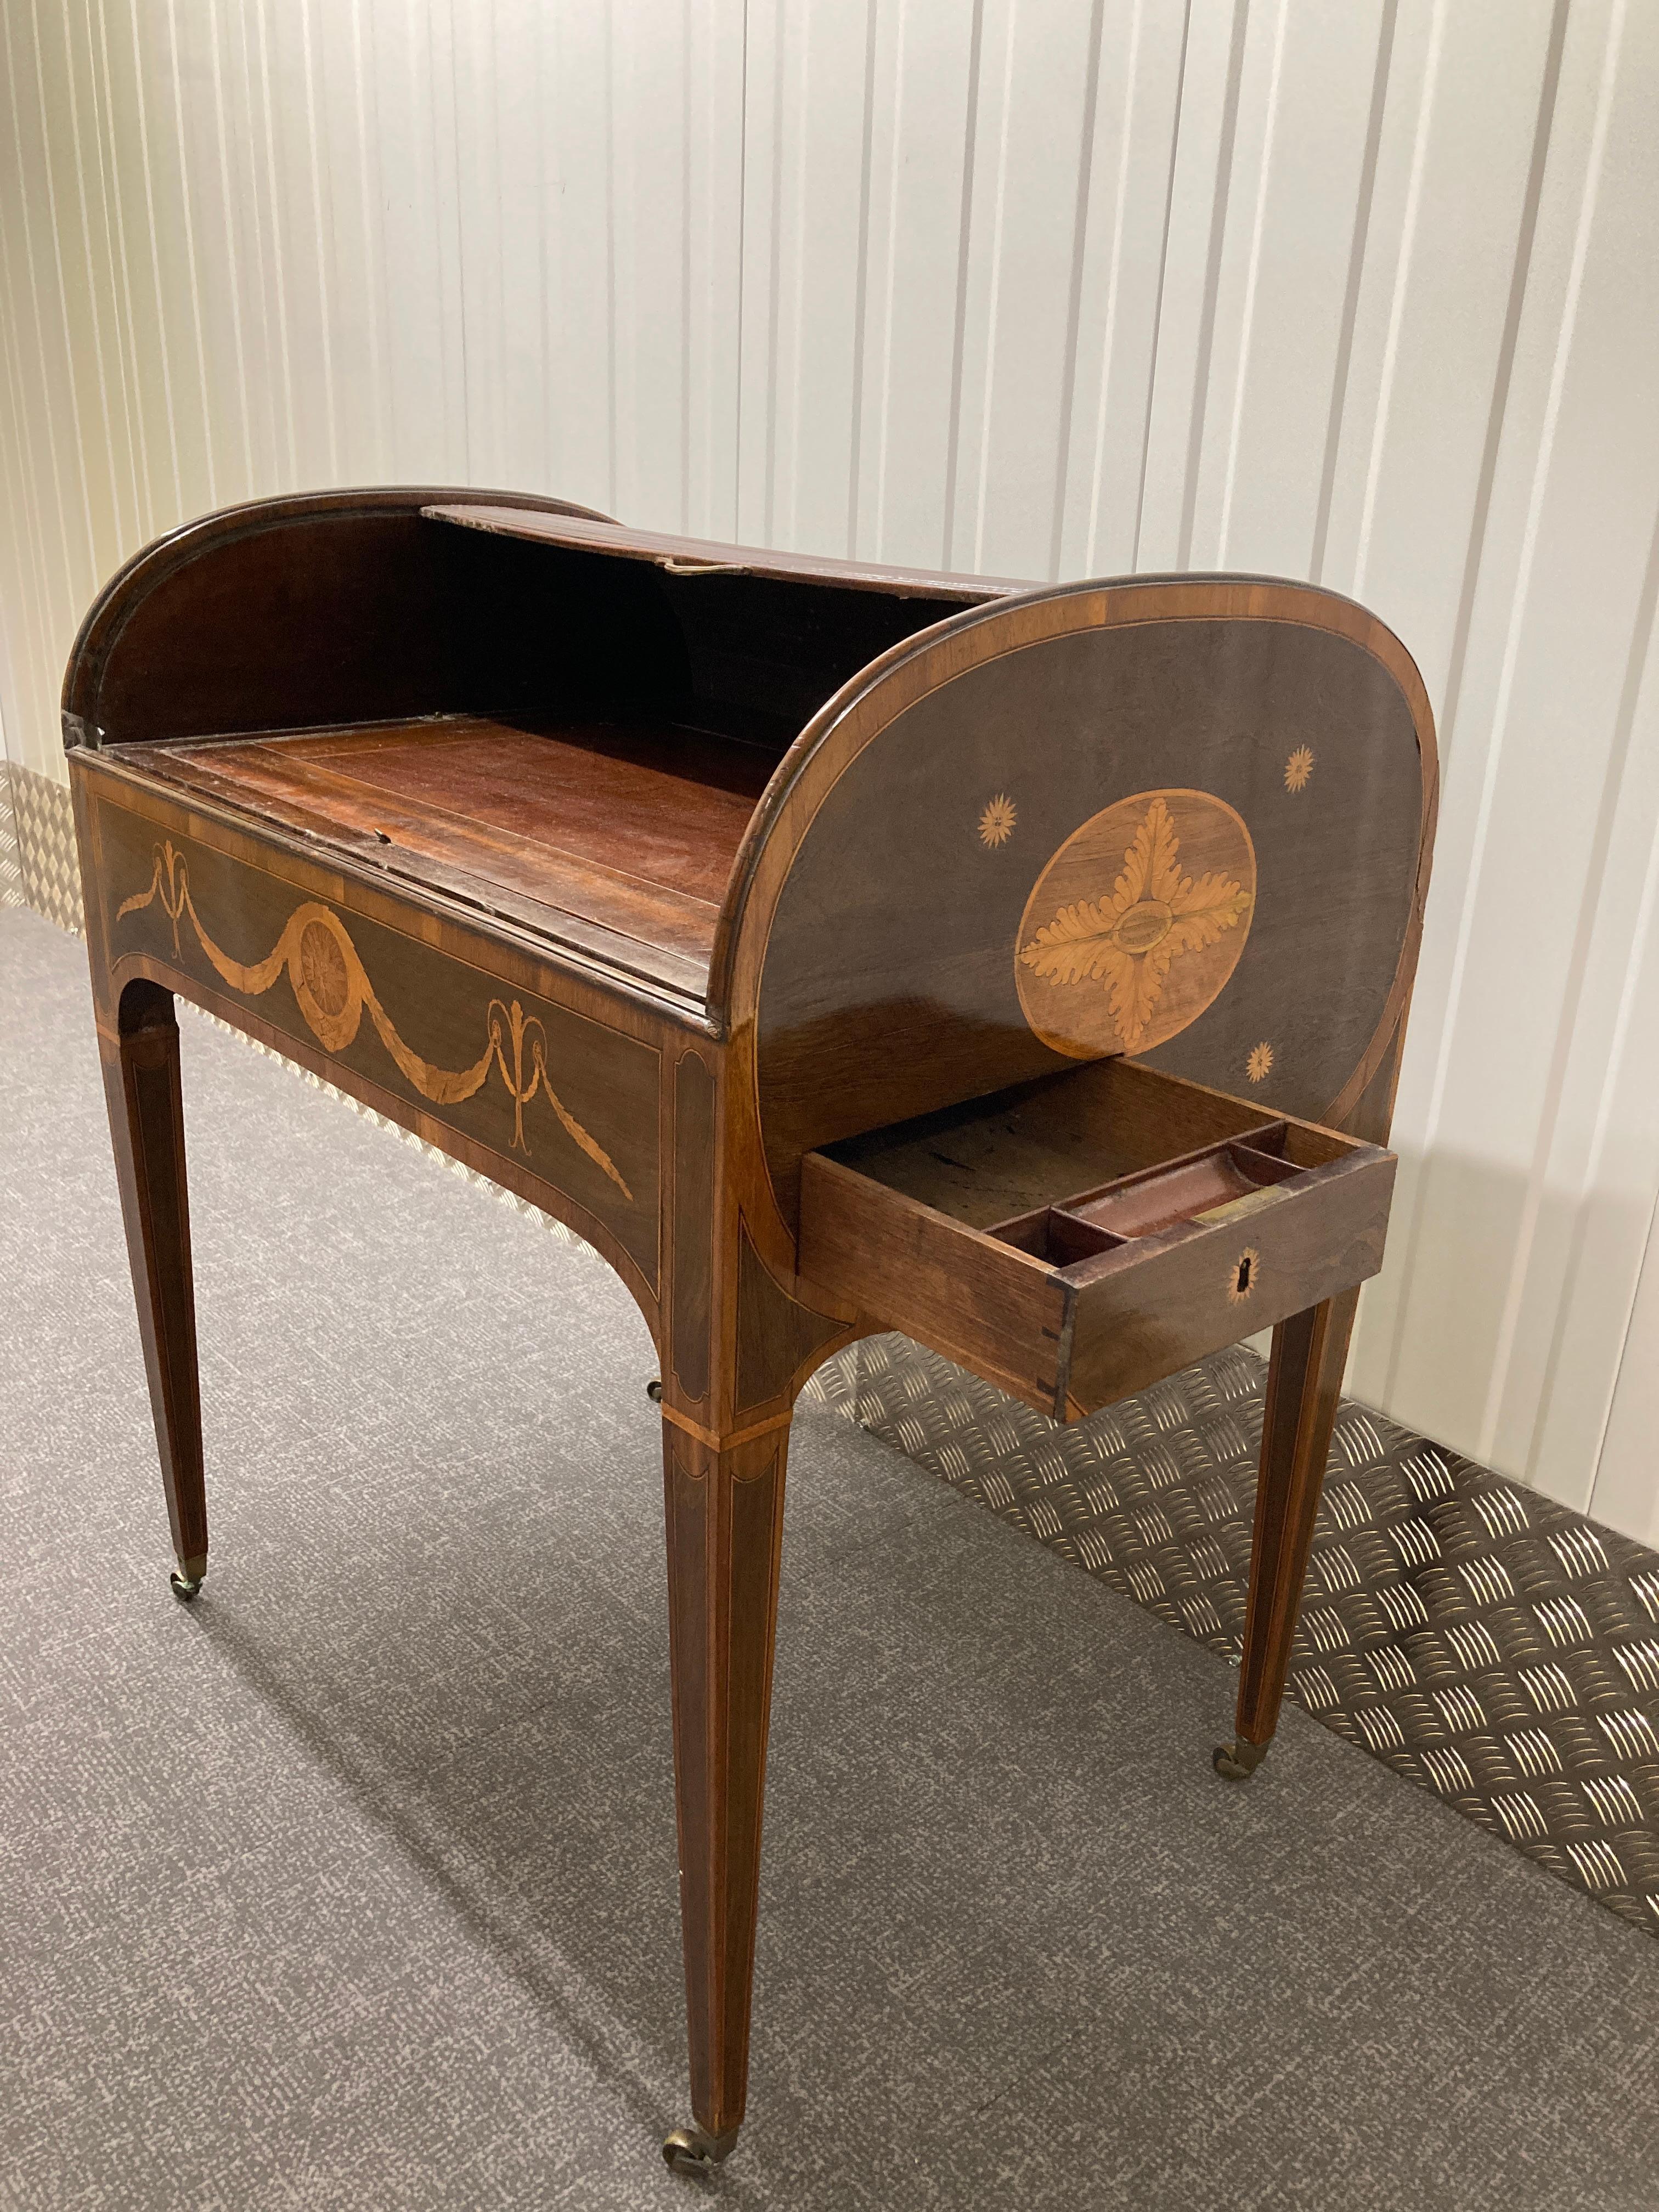 Sheraton period partridigewood desk, completely enclosed by reeded tambour shutter, a short draw to each side, on square tapering legs, the whole inlaid with floral marquetry panels crossbanding and lines, 31 inches wide.